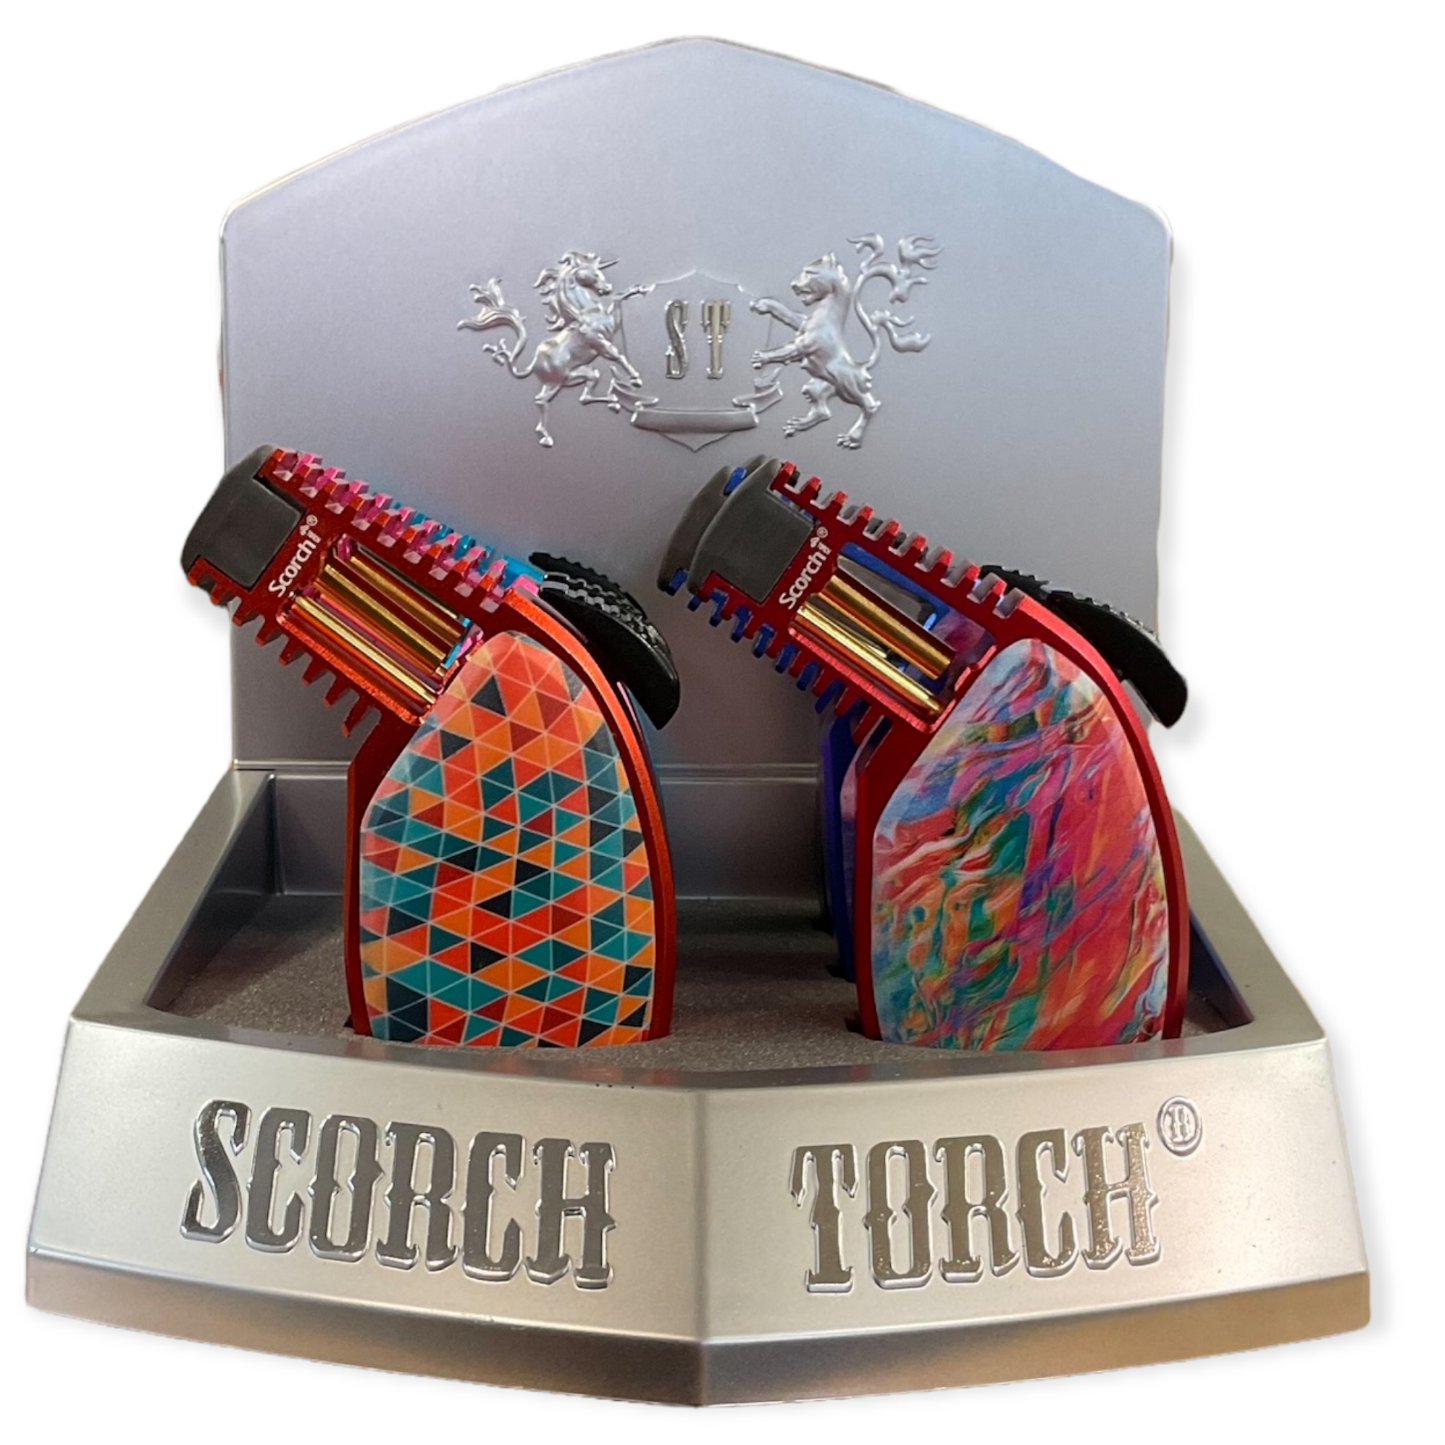 Scorch Torch - X Series Eclipse w/Color Print 6pk Display